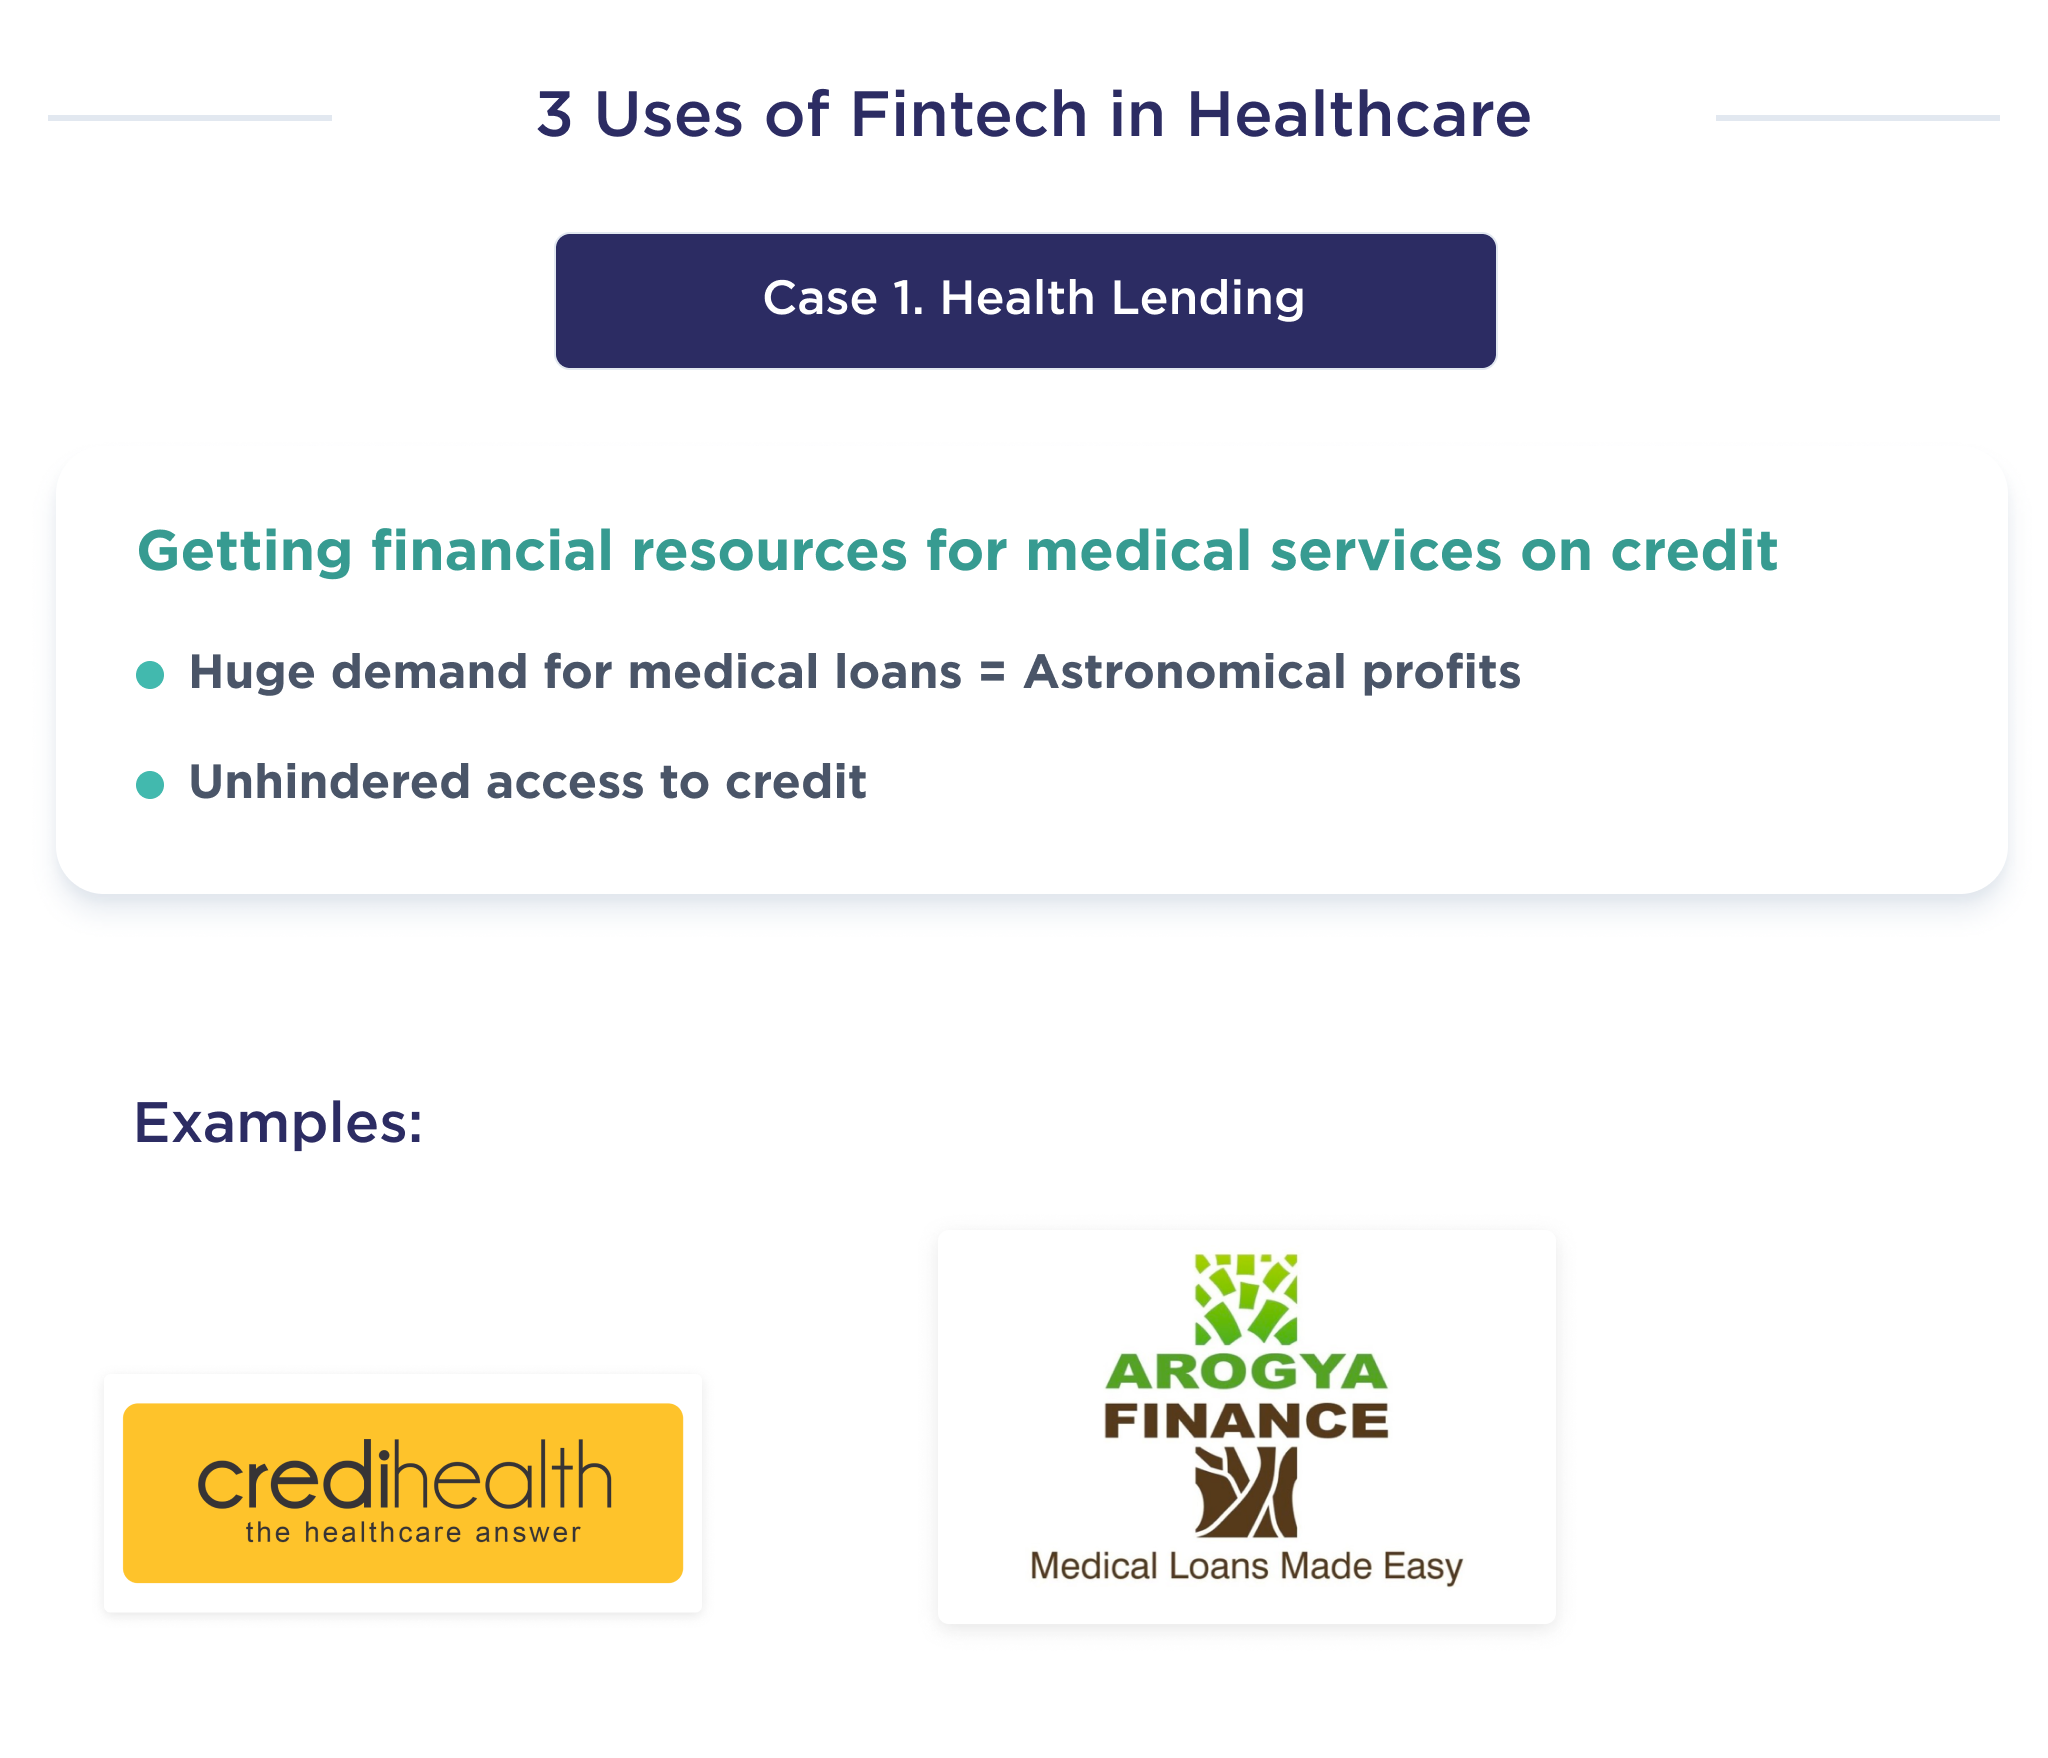 The illustration shows one of the uses of FinTech in healthcare, which describes health lending